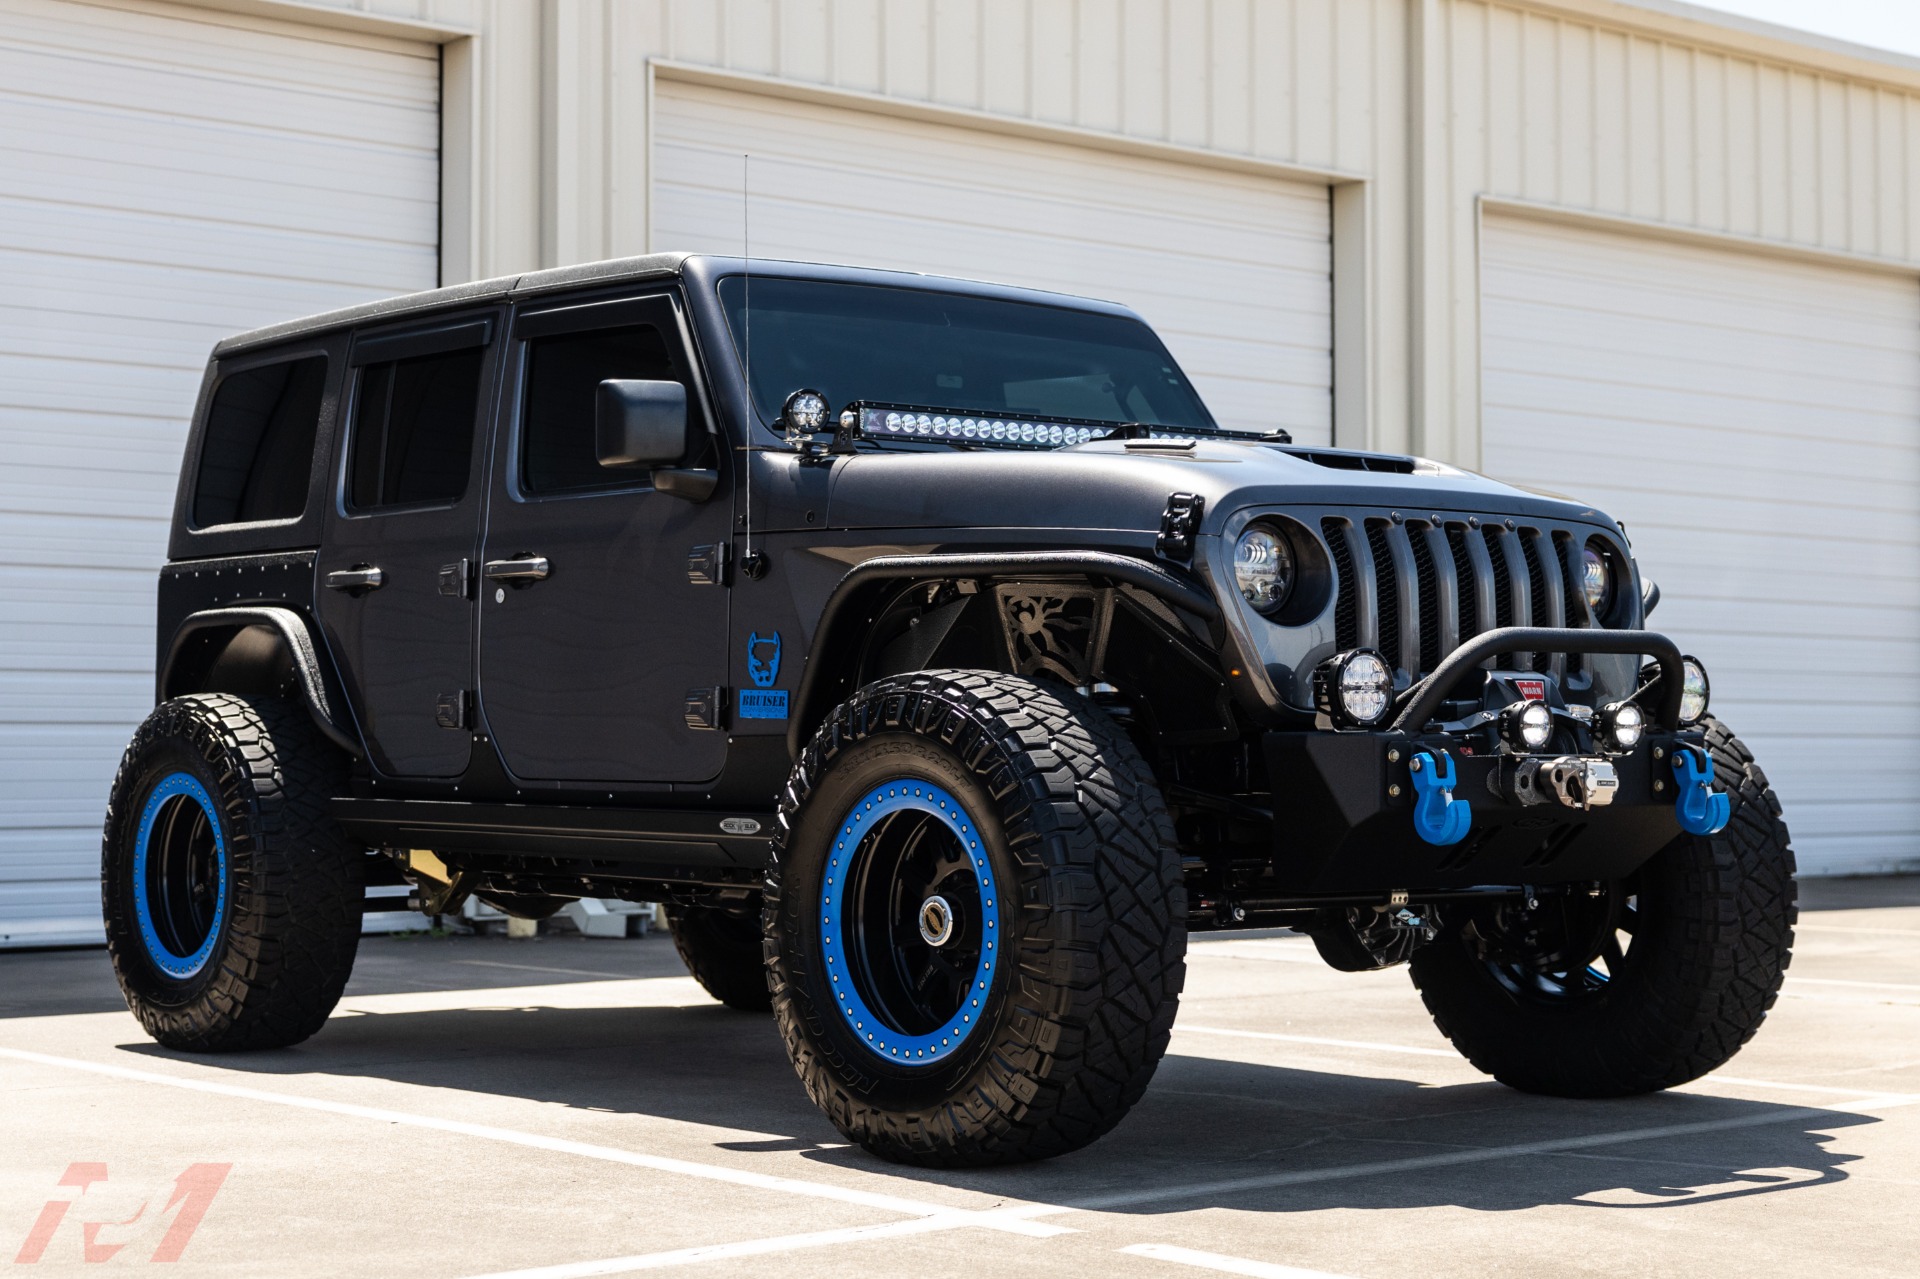 Used-2018-Jeep-Wrangler-Unlimited-JL-Bruiser-Conversions-LS3